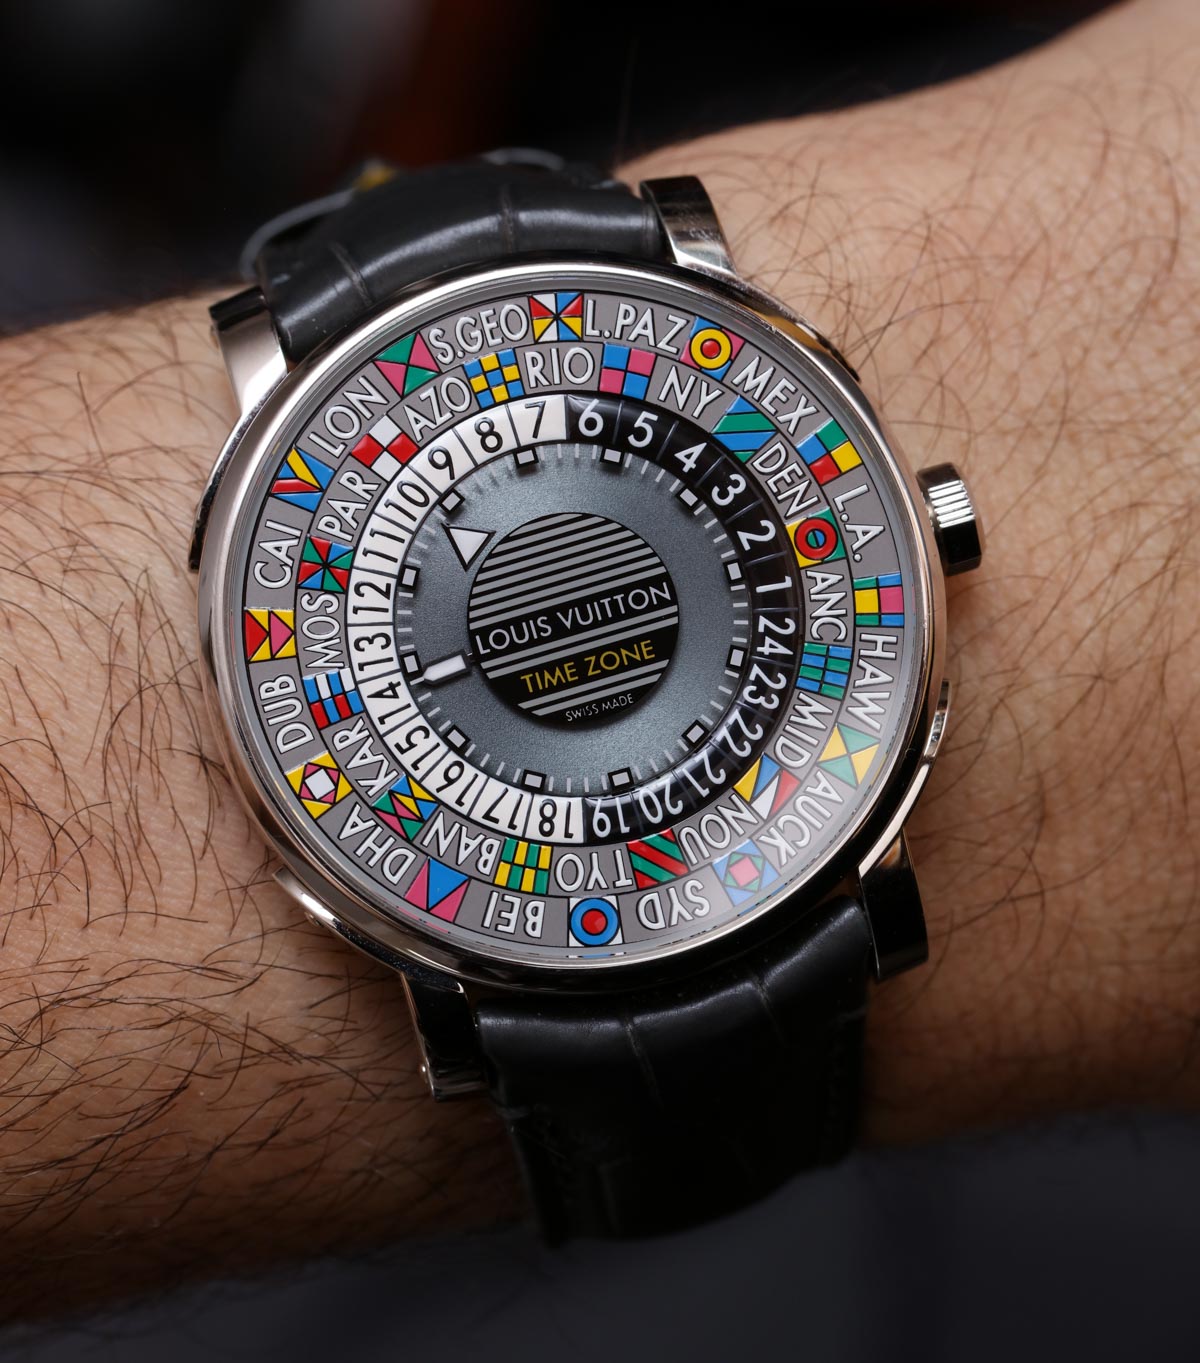 Wrist Time Review: Louis Vuitton Escale Time Zone 39 World Timer Watch | aBlogtoWatch